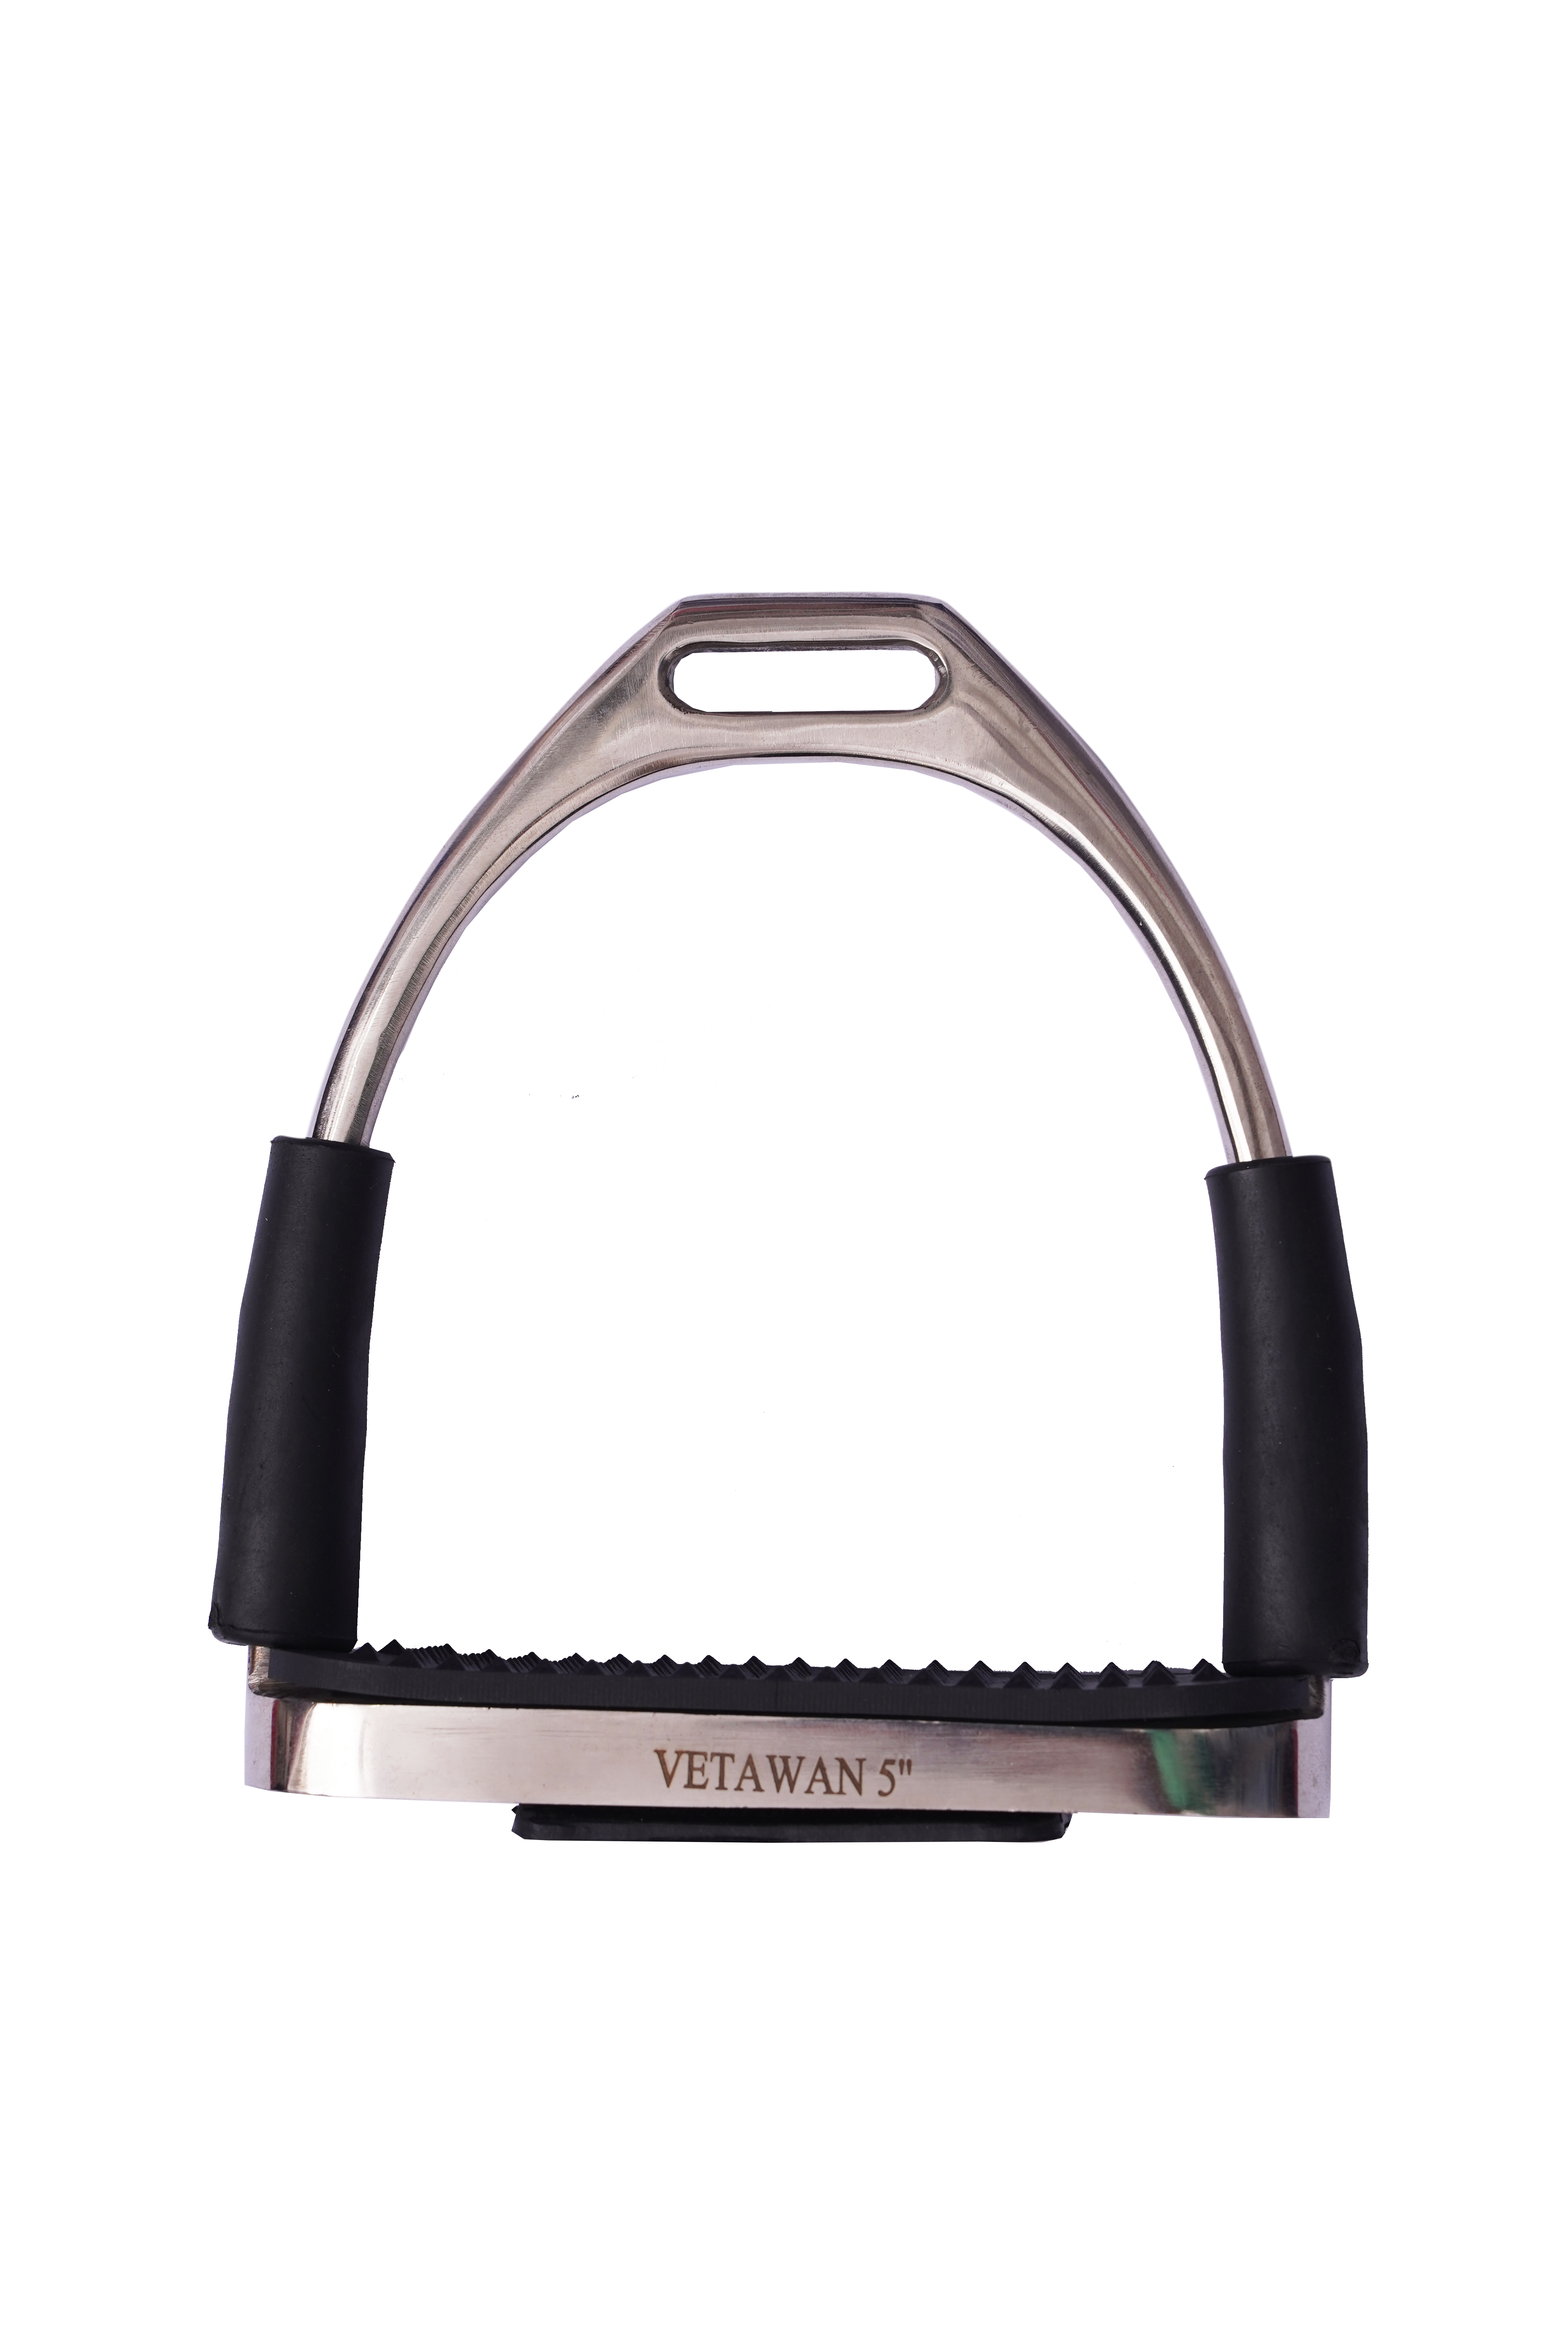 VAWAN Supre Stainless steel Stirrup with Rubber pad